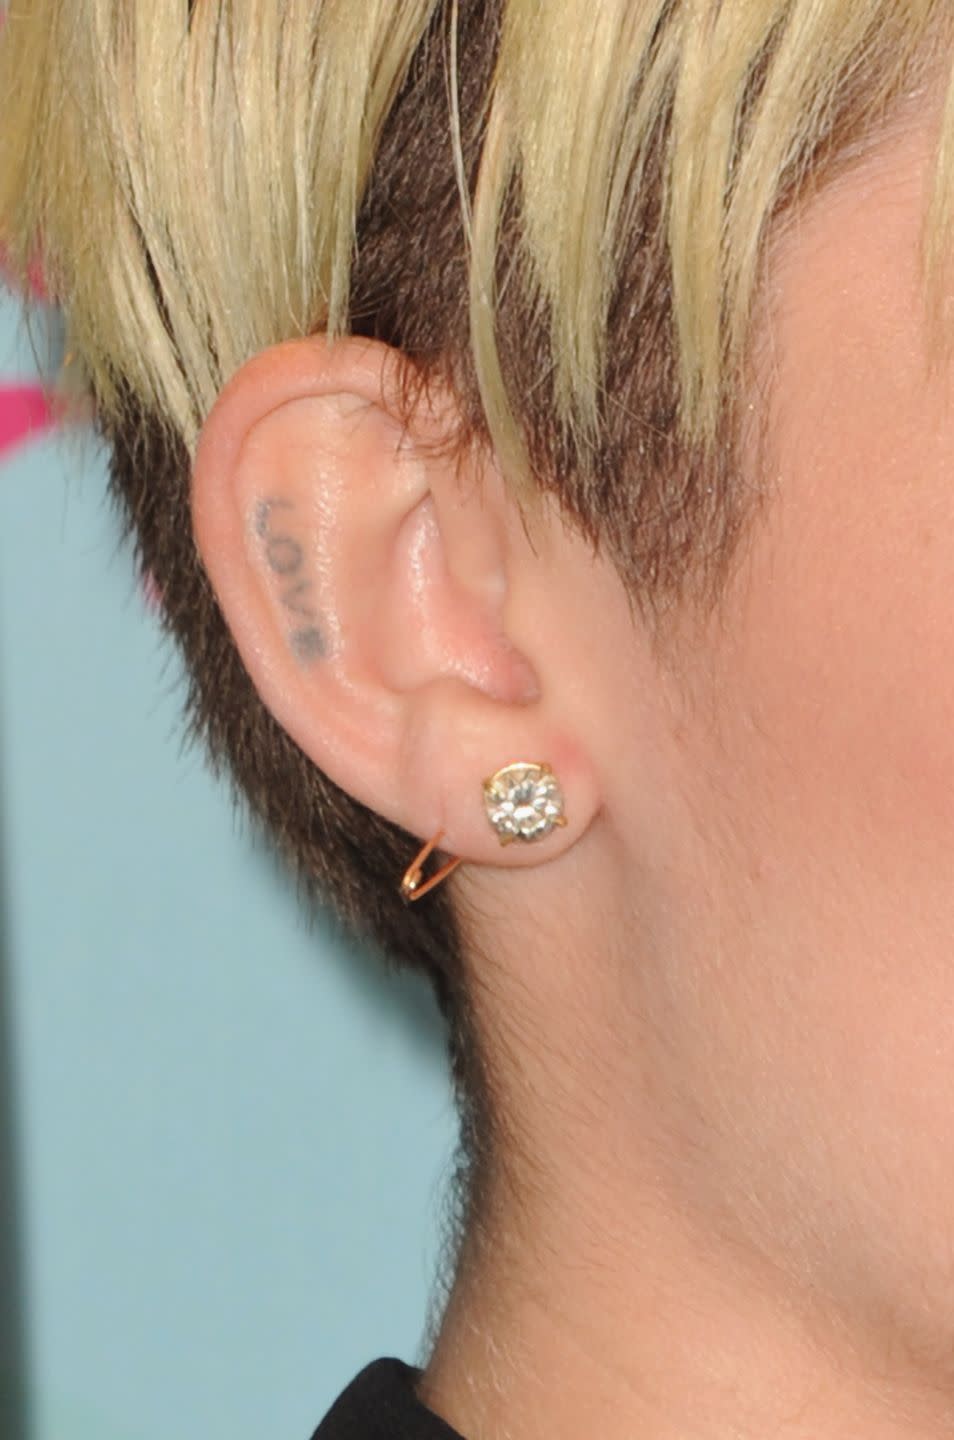 "Love" on her right ear